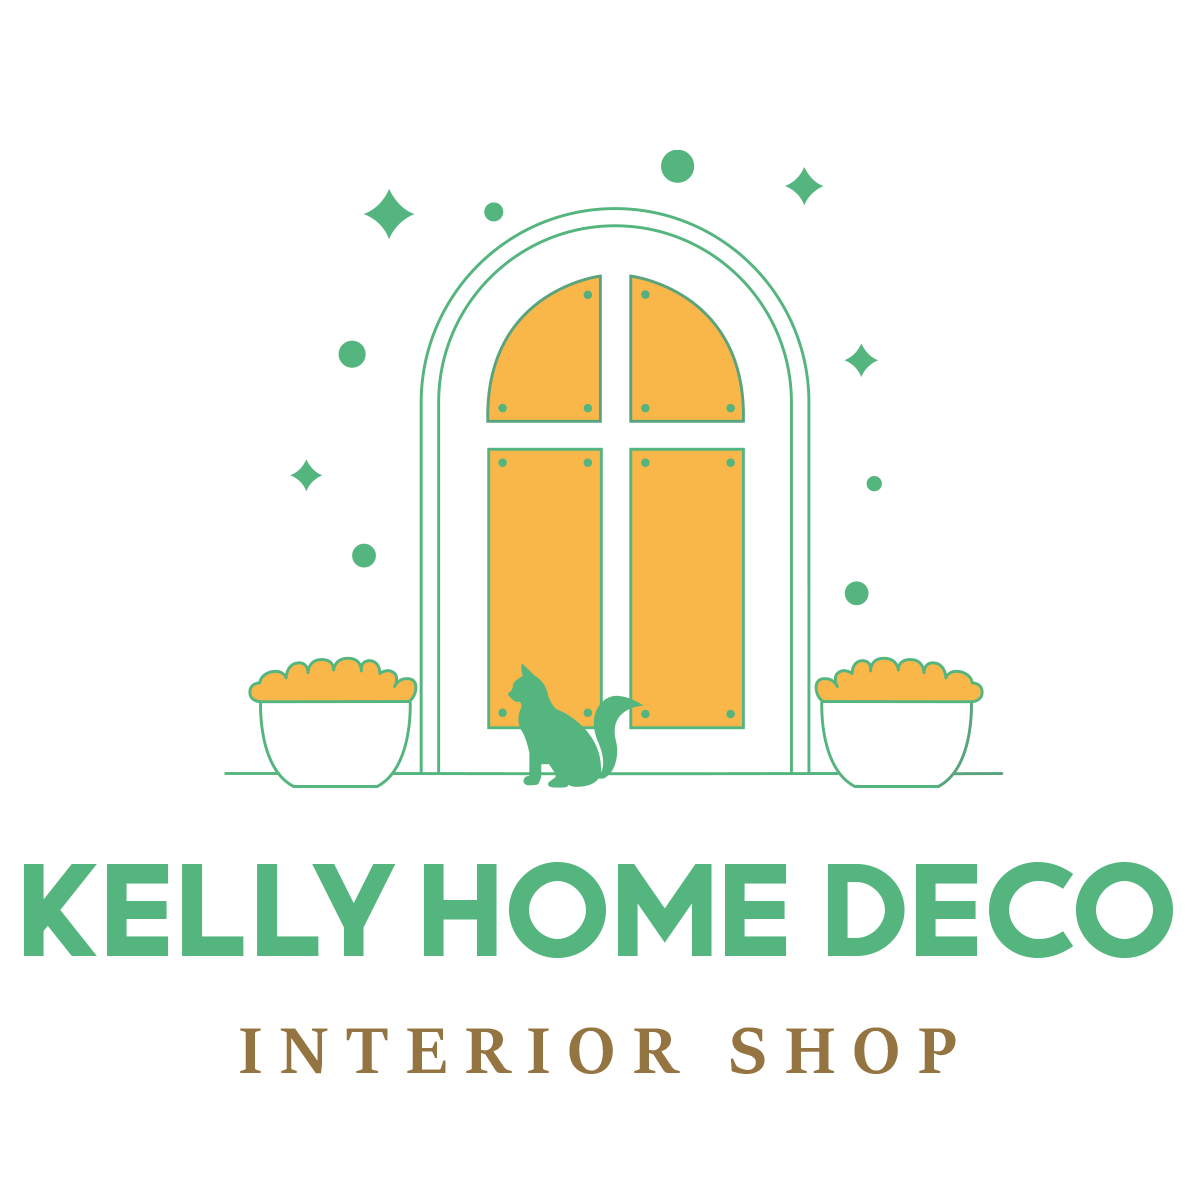 Kelly Home Deco